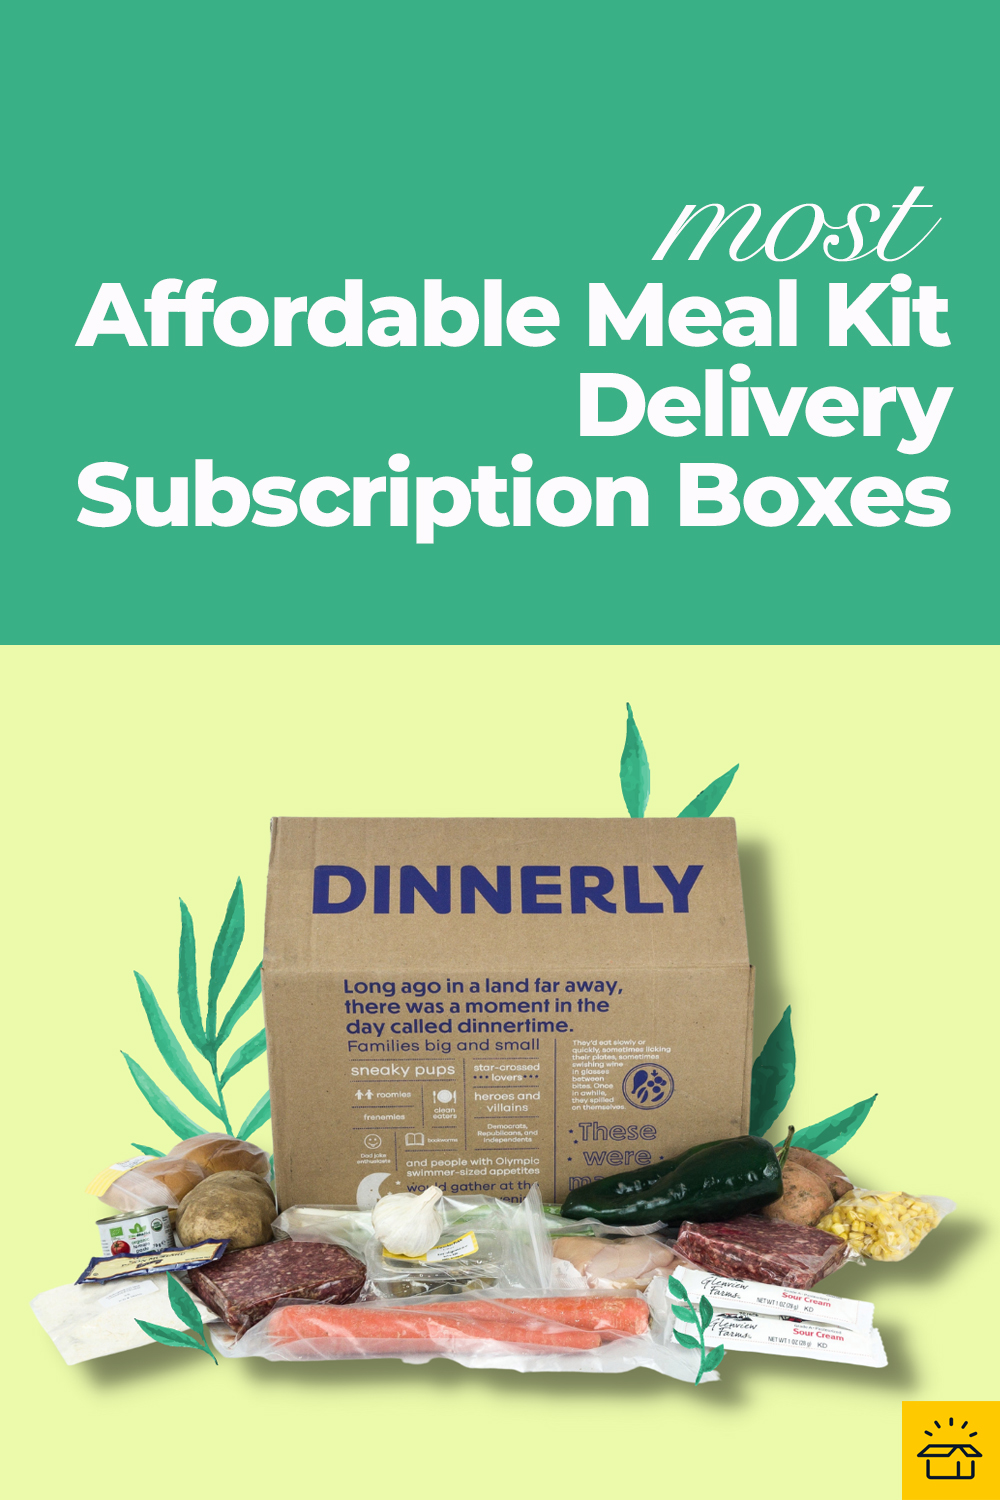 https://hellosubscription.com/wp-content/uploads/2021/04/best-affordable-meal-kit-delivery.jpg?quality=90&strip=all